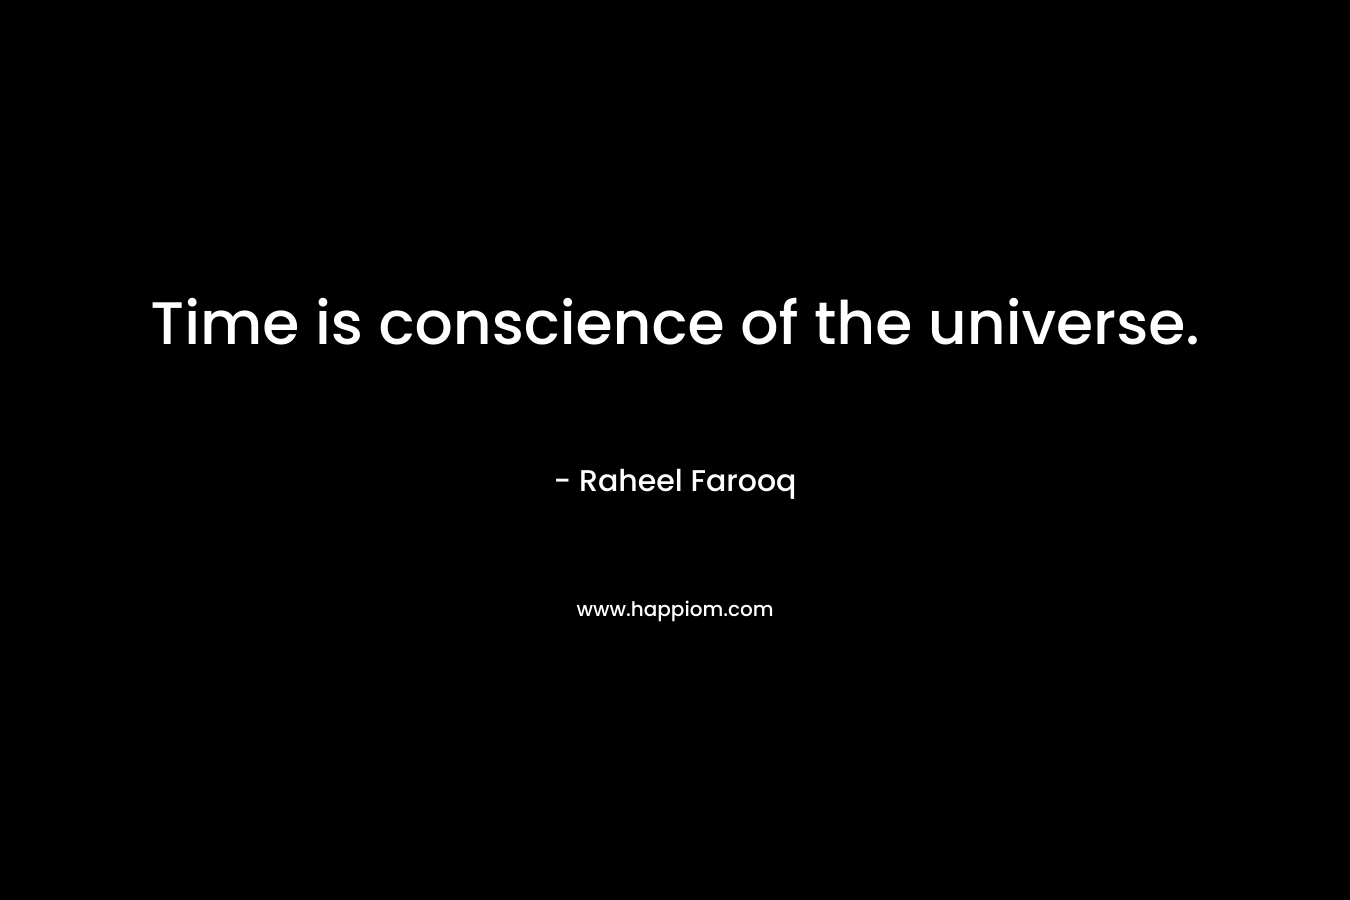 Time is conscience of the universe. – Raheel Farooq